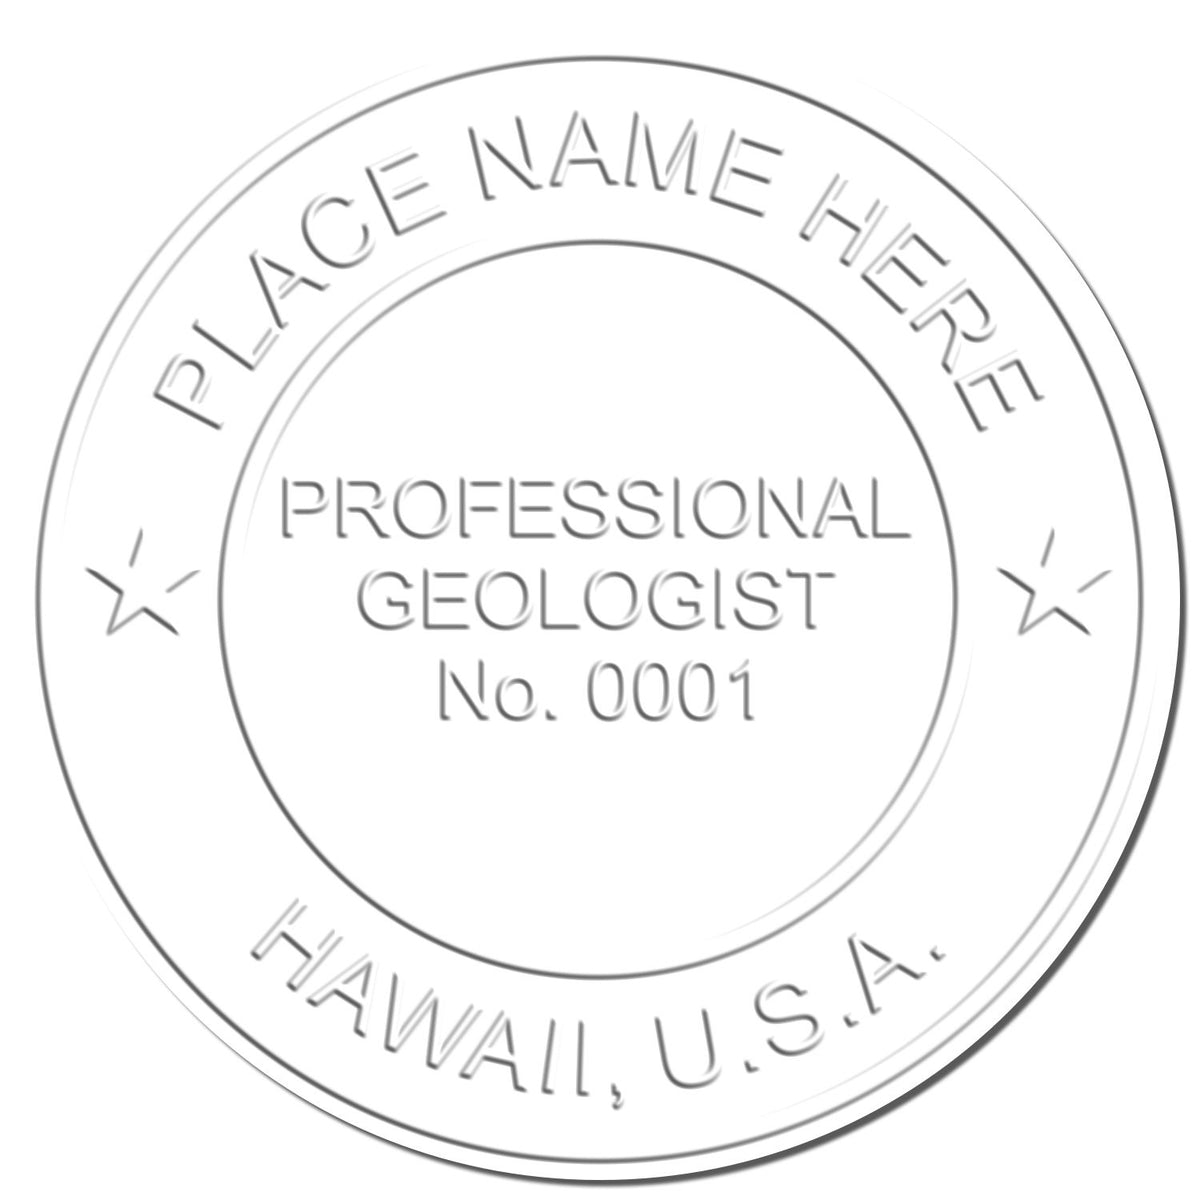 The Hawaii Geologist Desk Seal stamp impression comes to life with a crisp, detailed image stamped on paper - showcasing true professional quality.